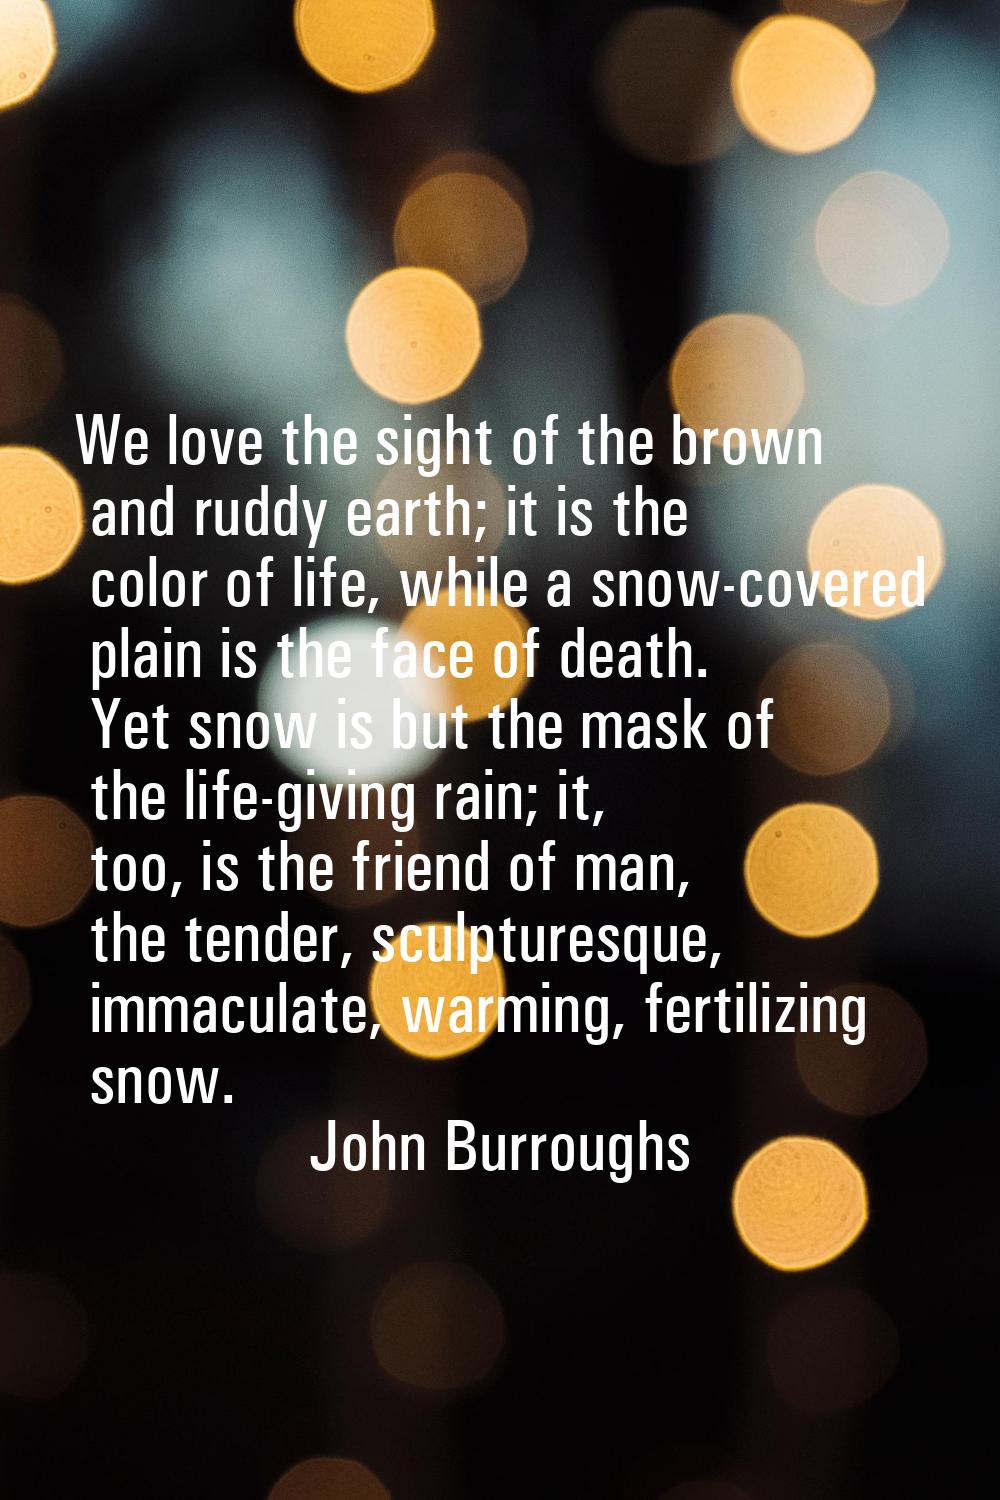 We love the sight of the brown and ruddy earth; it is the color of life, while a snow-covered plain